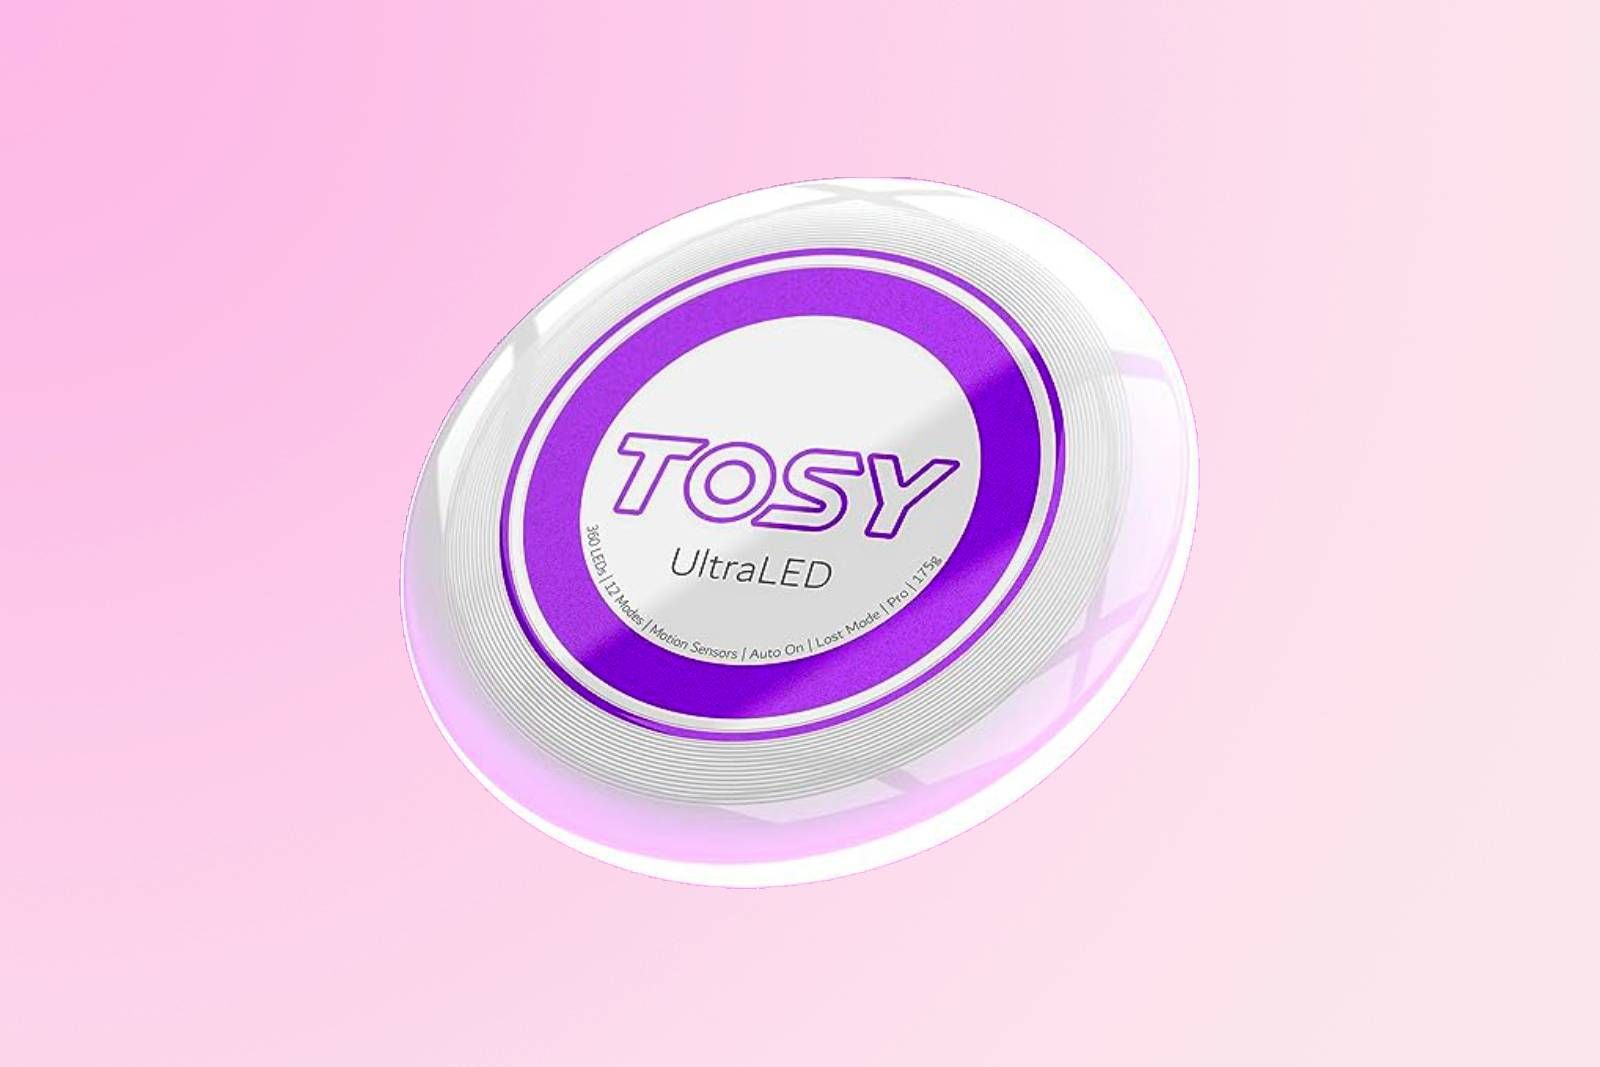 TOSY Flying Disc on gradient background